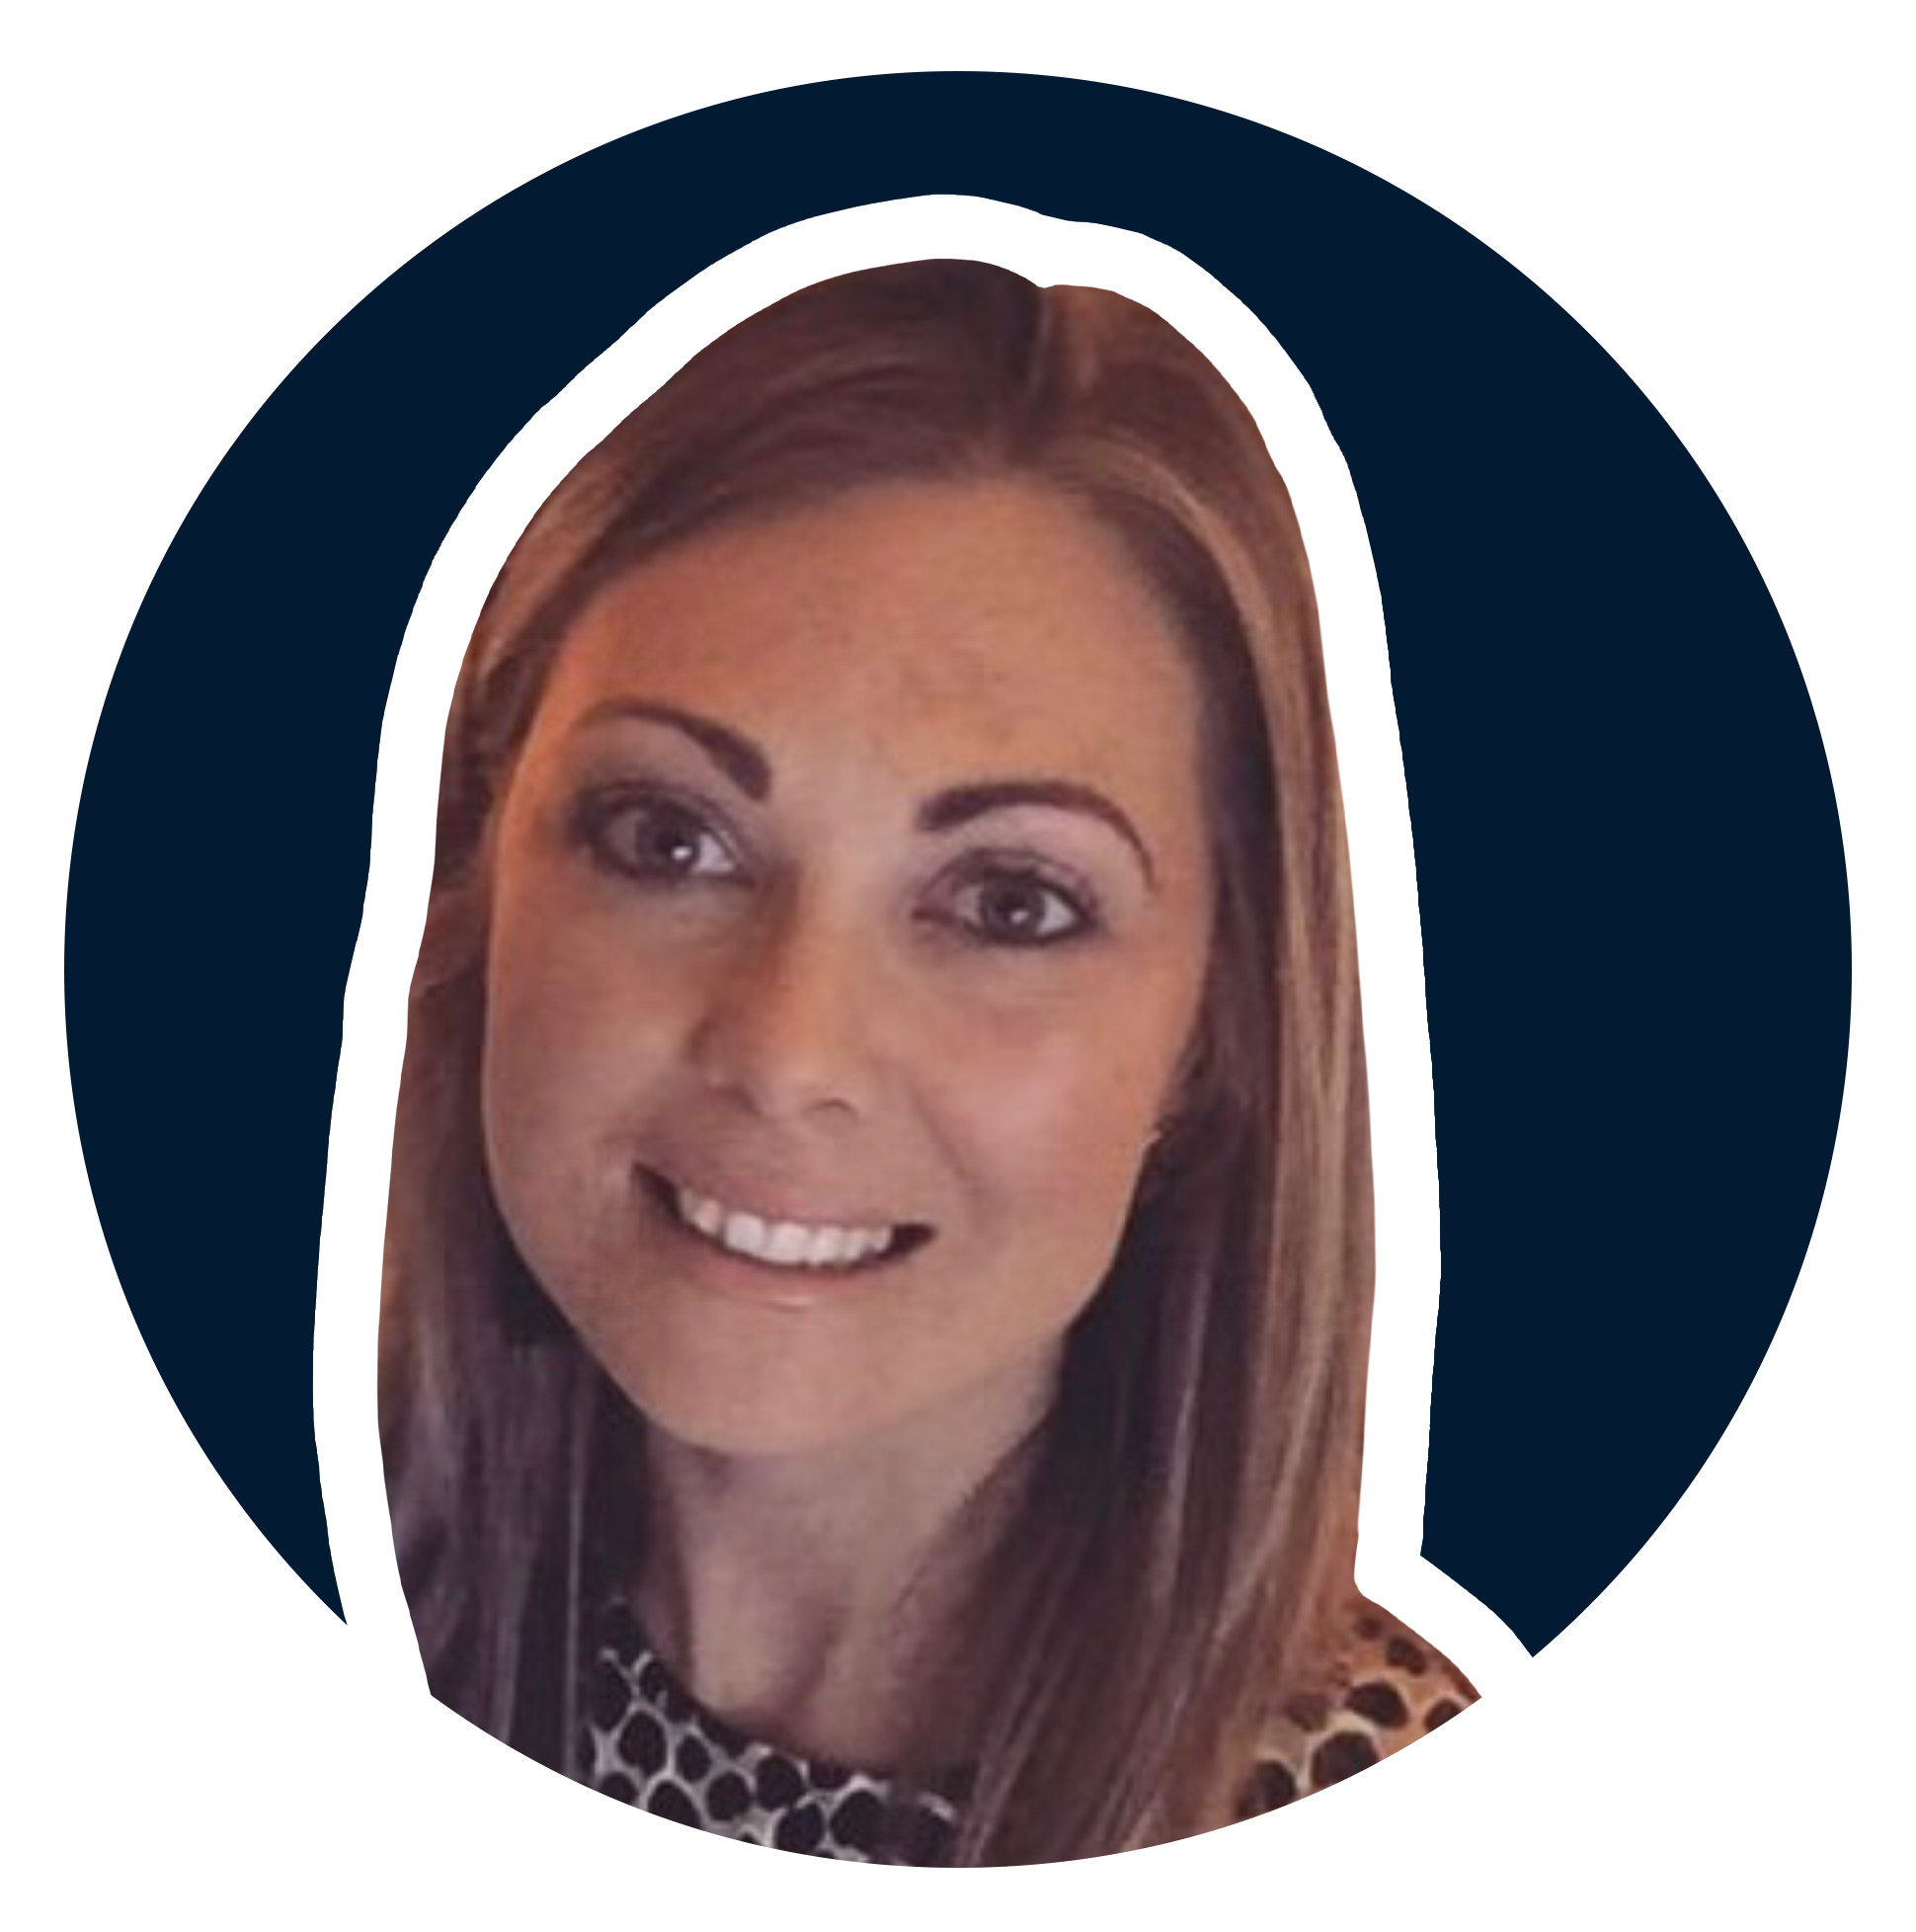 Rebecca Chappel - Customer Experience Manager